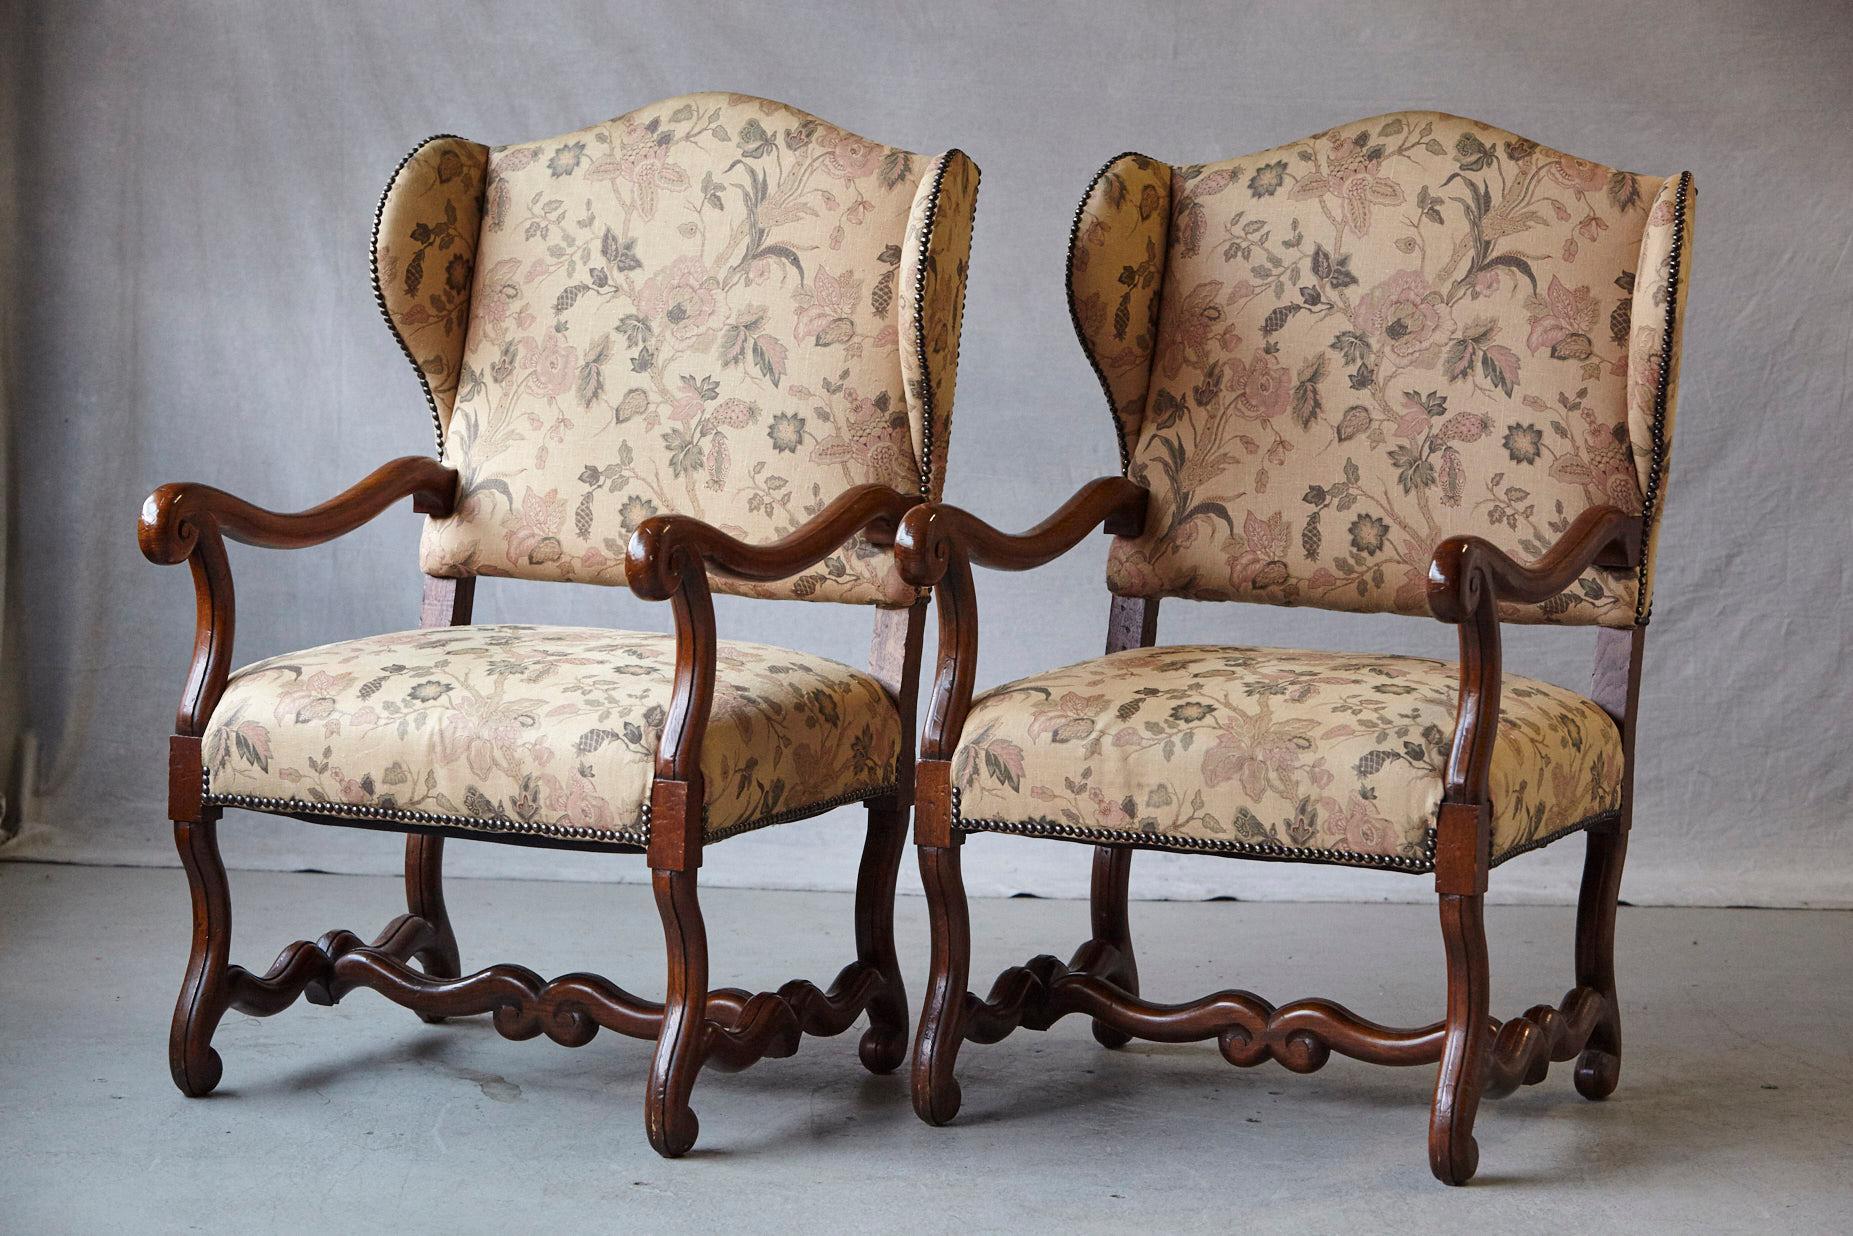 Striking pair of antique French Louis XIV style, walnut wingback fauteuils with carved armrests, standing on 'os de mouton' legs joined by H-shaped stretcher base, upholstered with a tapestry like fabric with nailhead trim, nailhead trim.
These